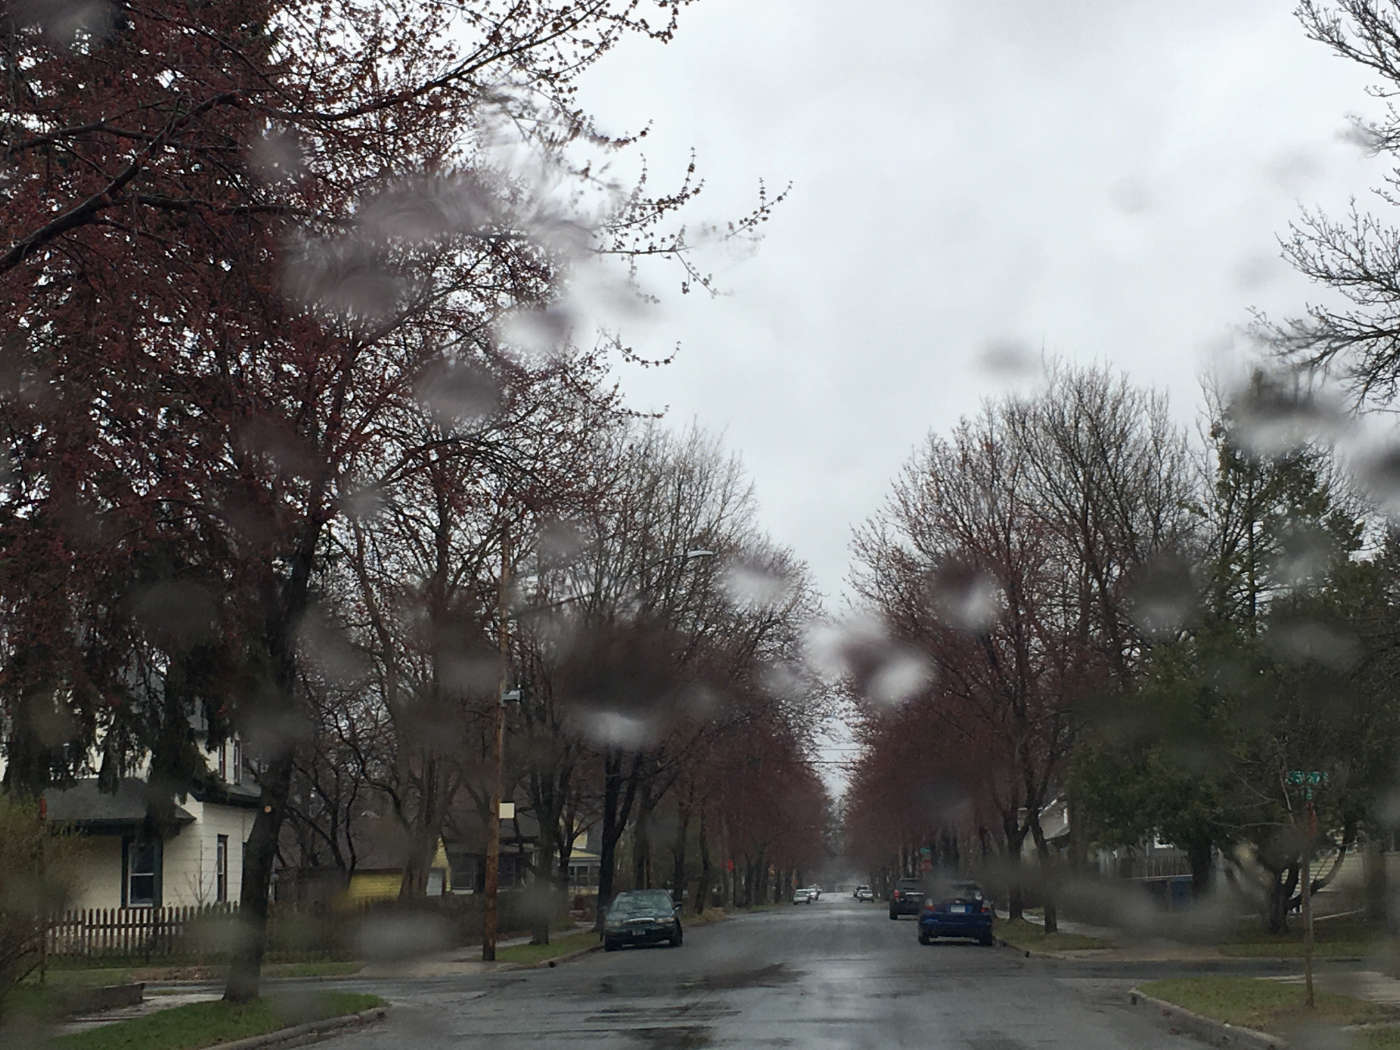 Rainy residential street with blurry drops on camera lens